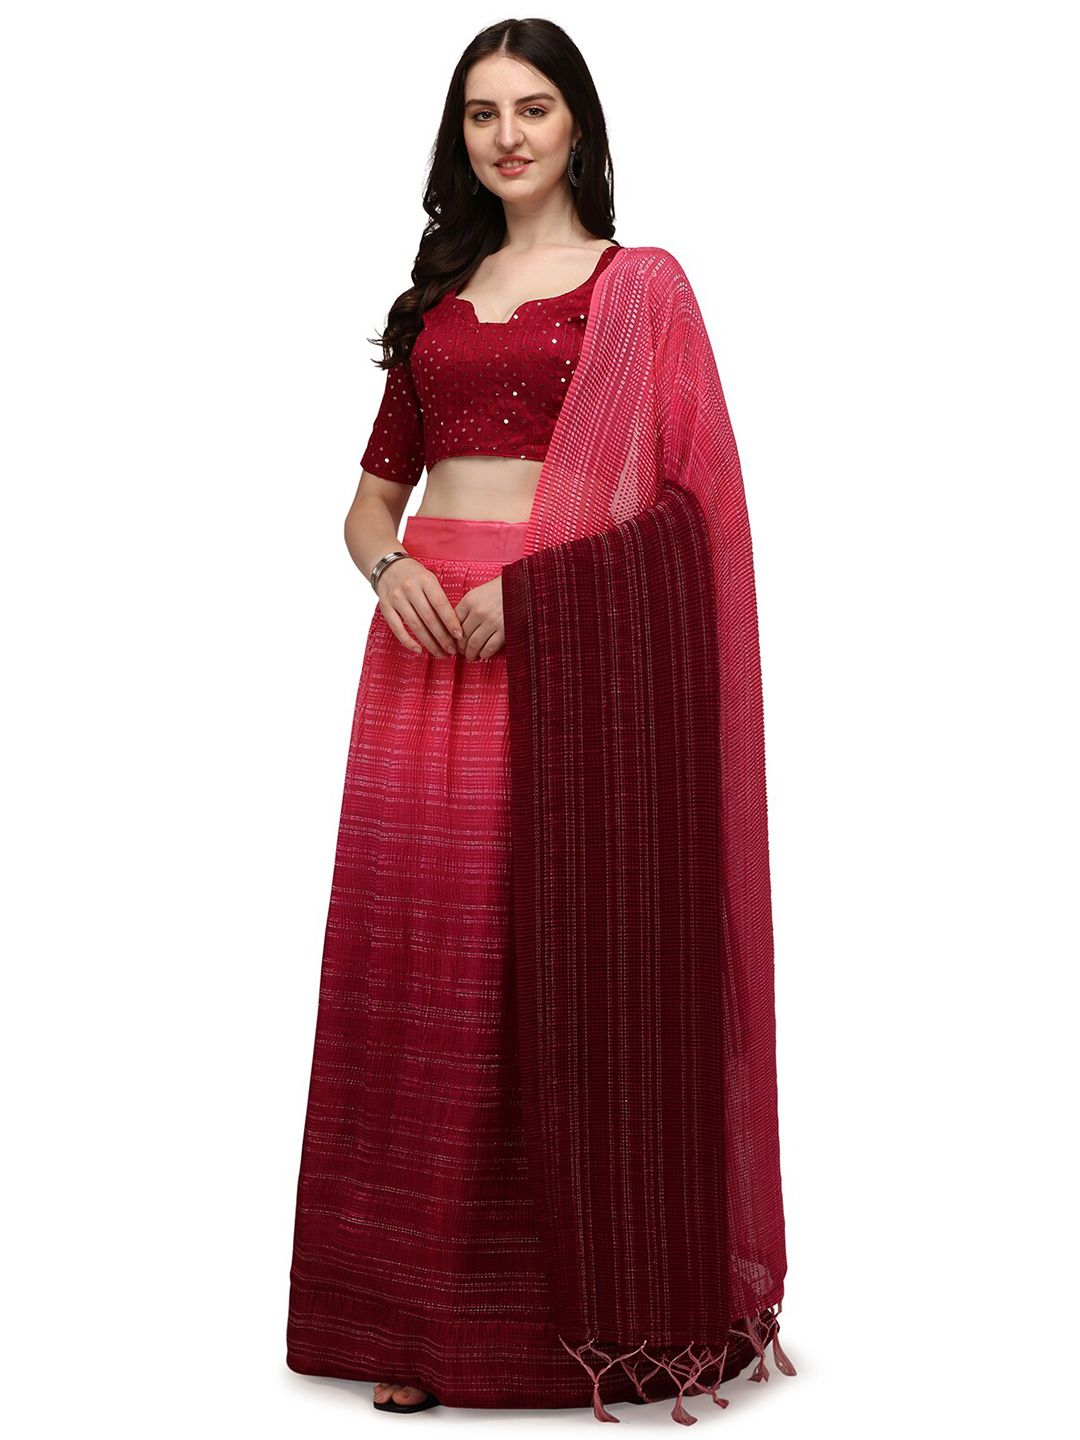 Pratham Blue Pink & Maroon Embroidered Semi-Stitched Lehenga & Unstitched Blouse With Dupatta Price in India